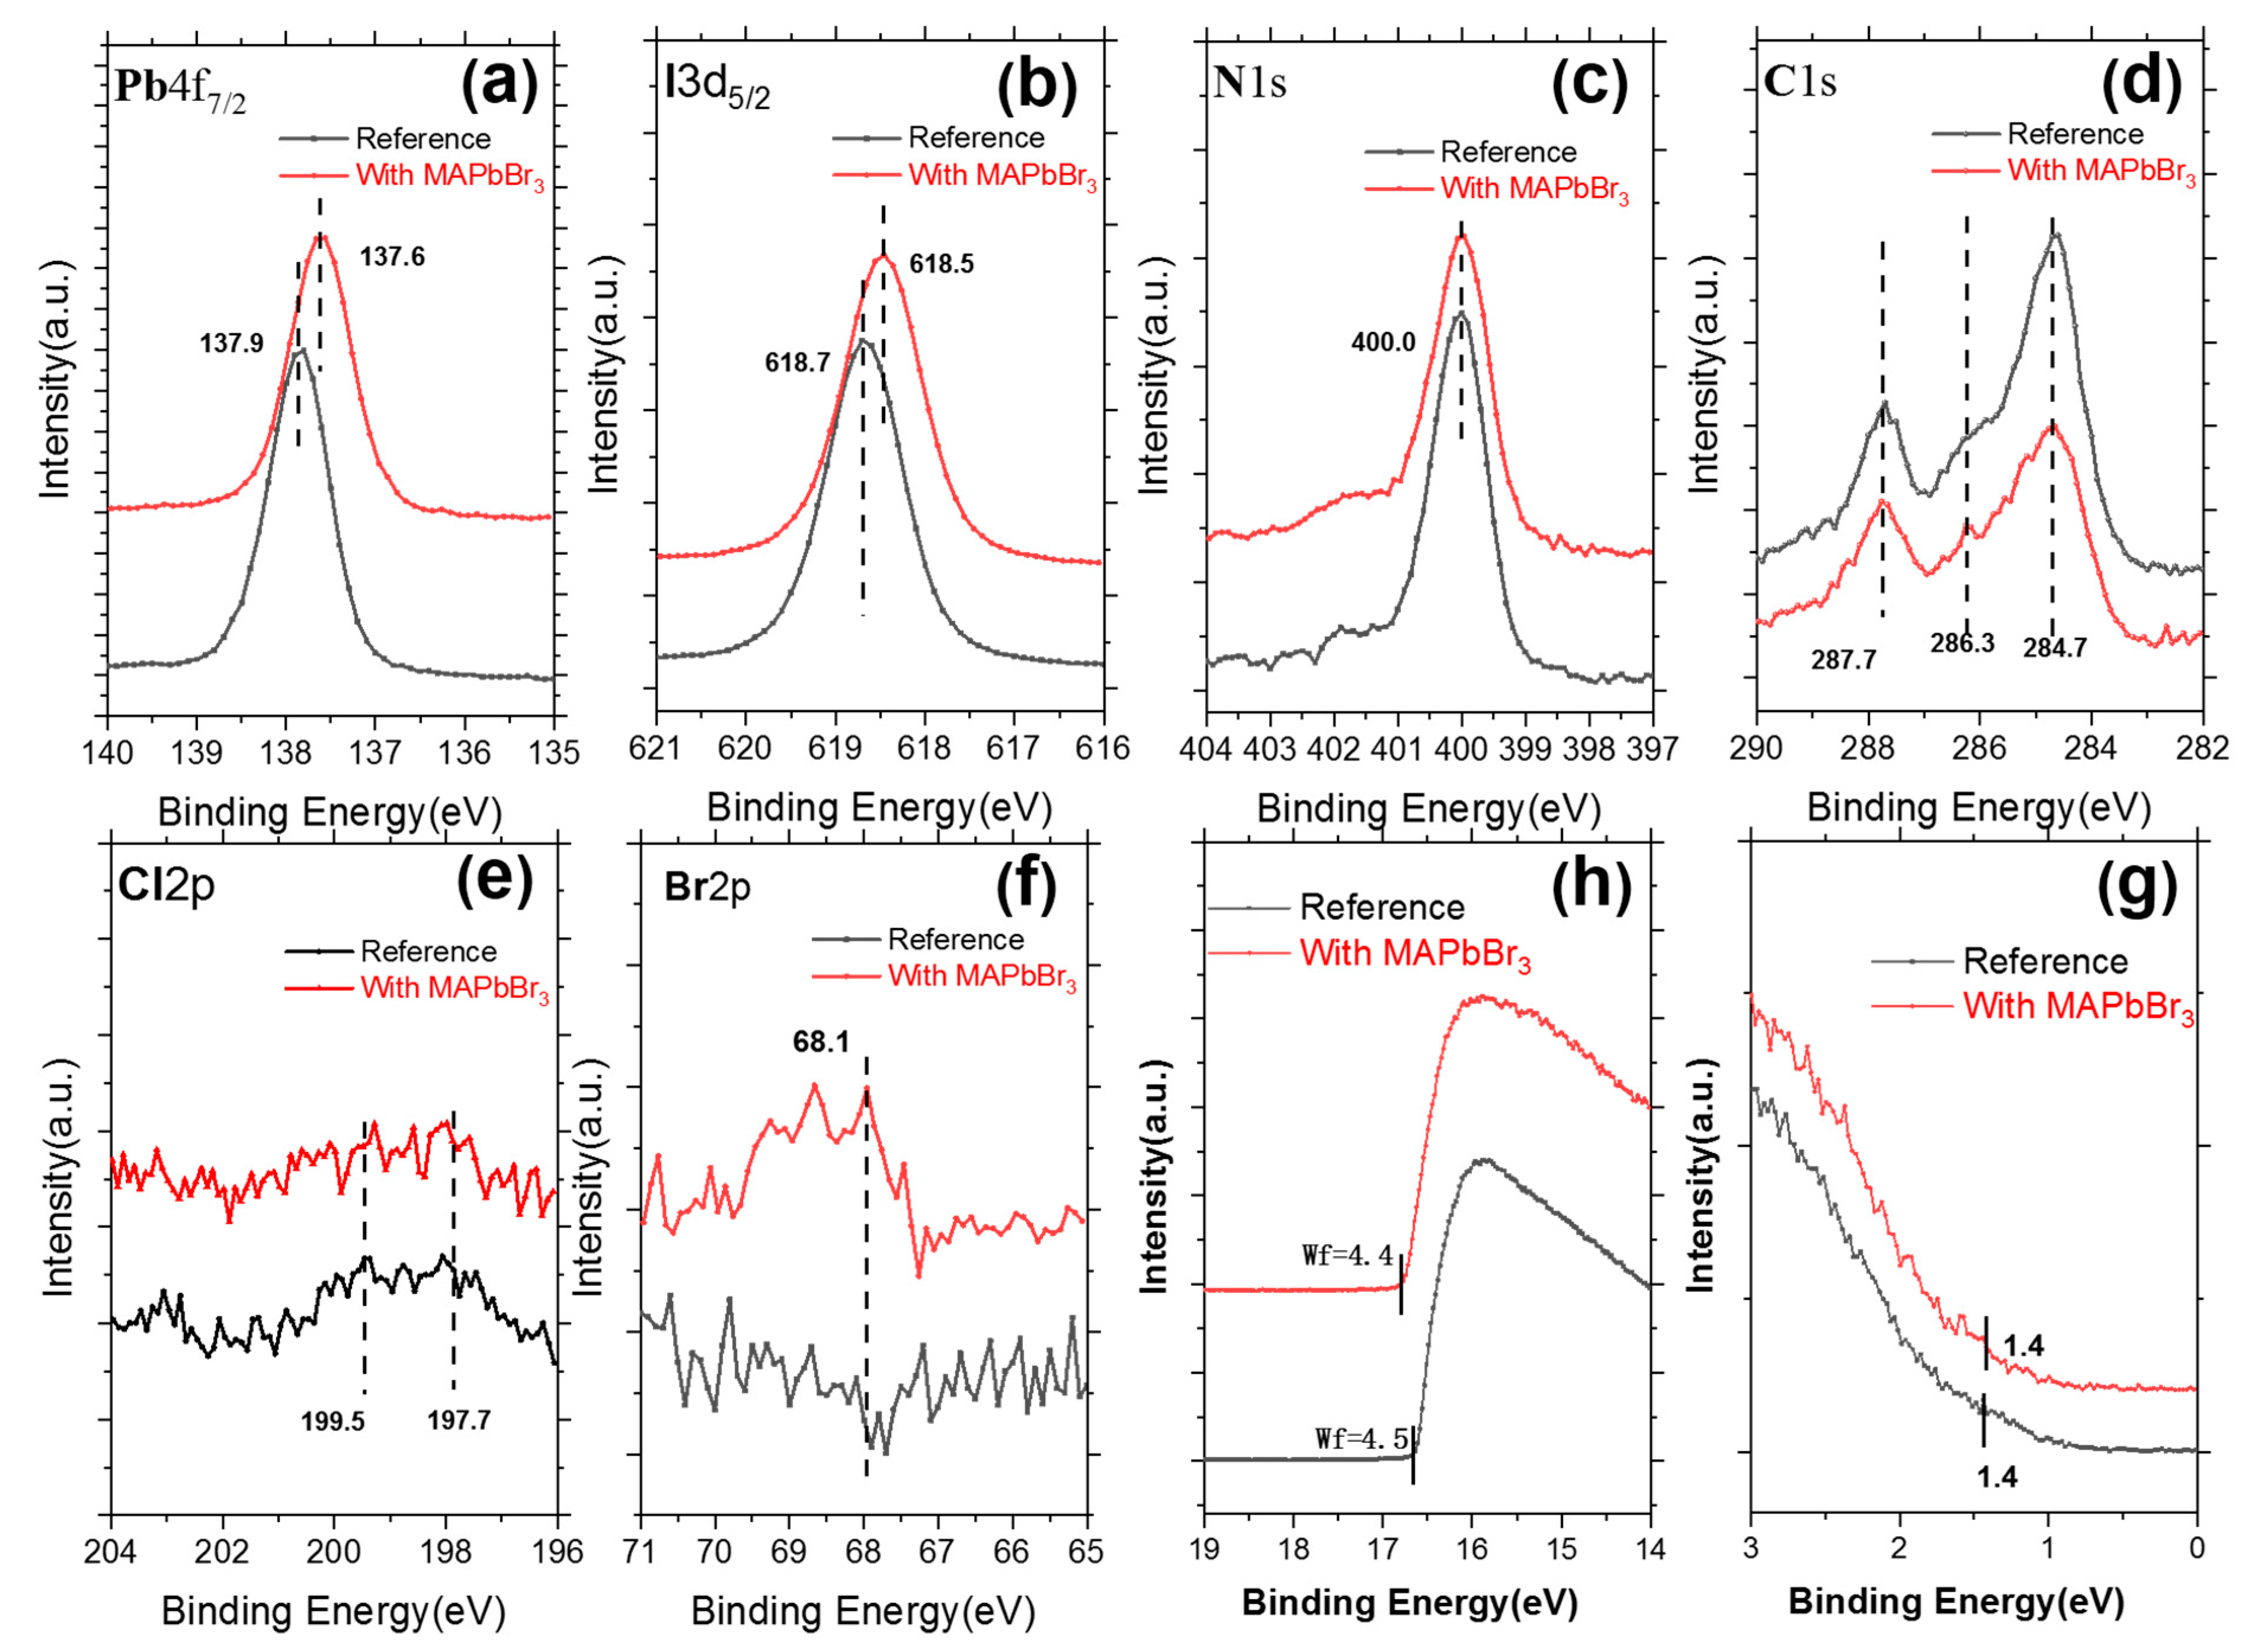 Coatings Free Full Text Impacts Of Mapbbr3 Additive On Crystallization Kinetics Of Fapbi3 Perovskite For High Performance Solar Cells Html